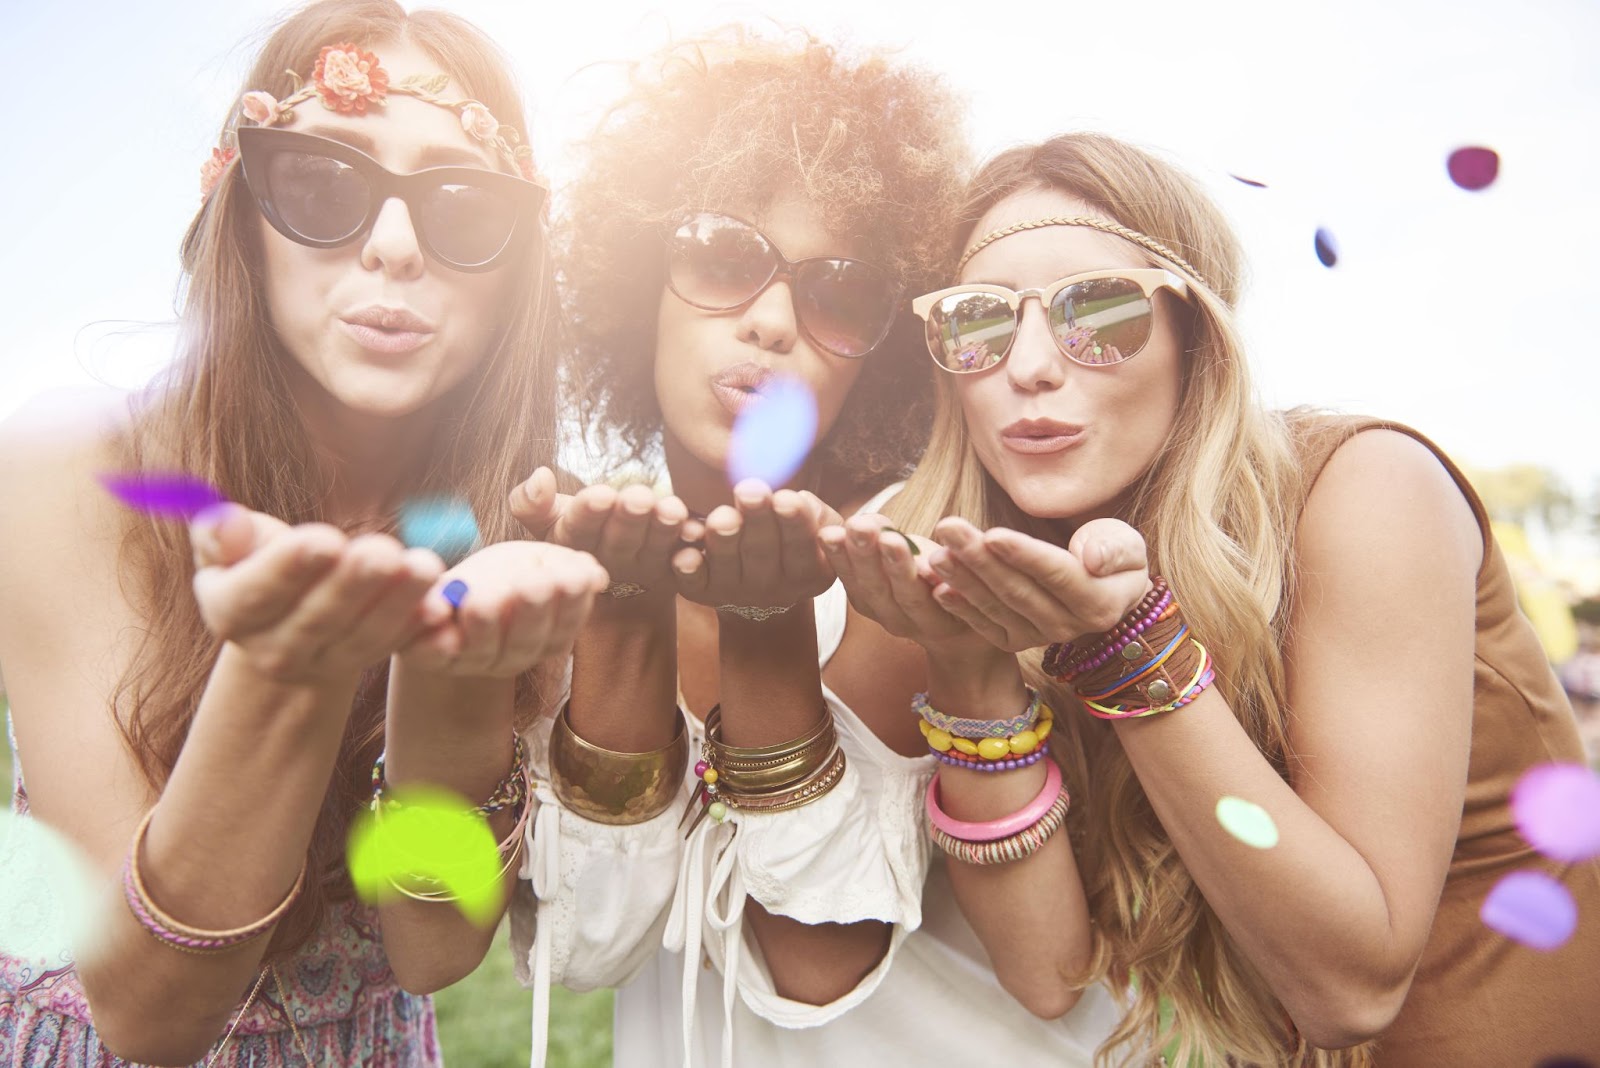 Three friends blowing confetti into the camera, smiles on their faces and many bracelets on wrists along with sunglasses on each of them